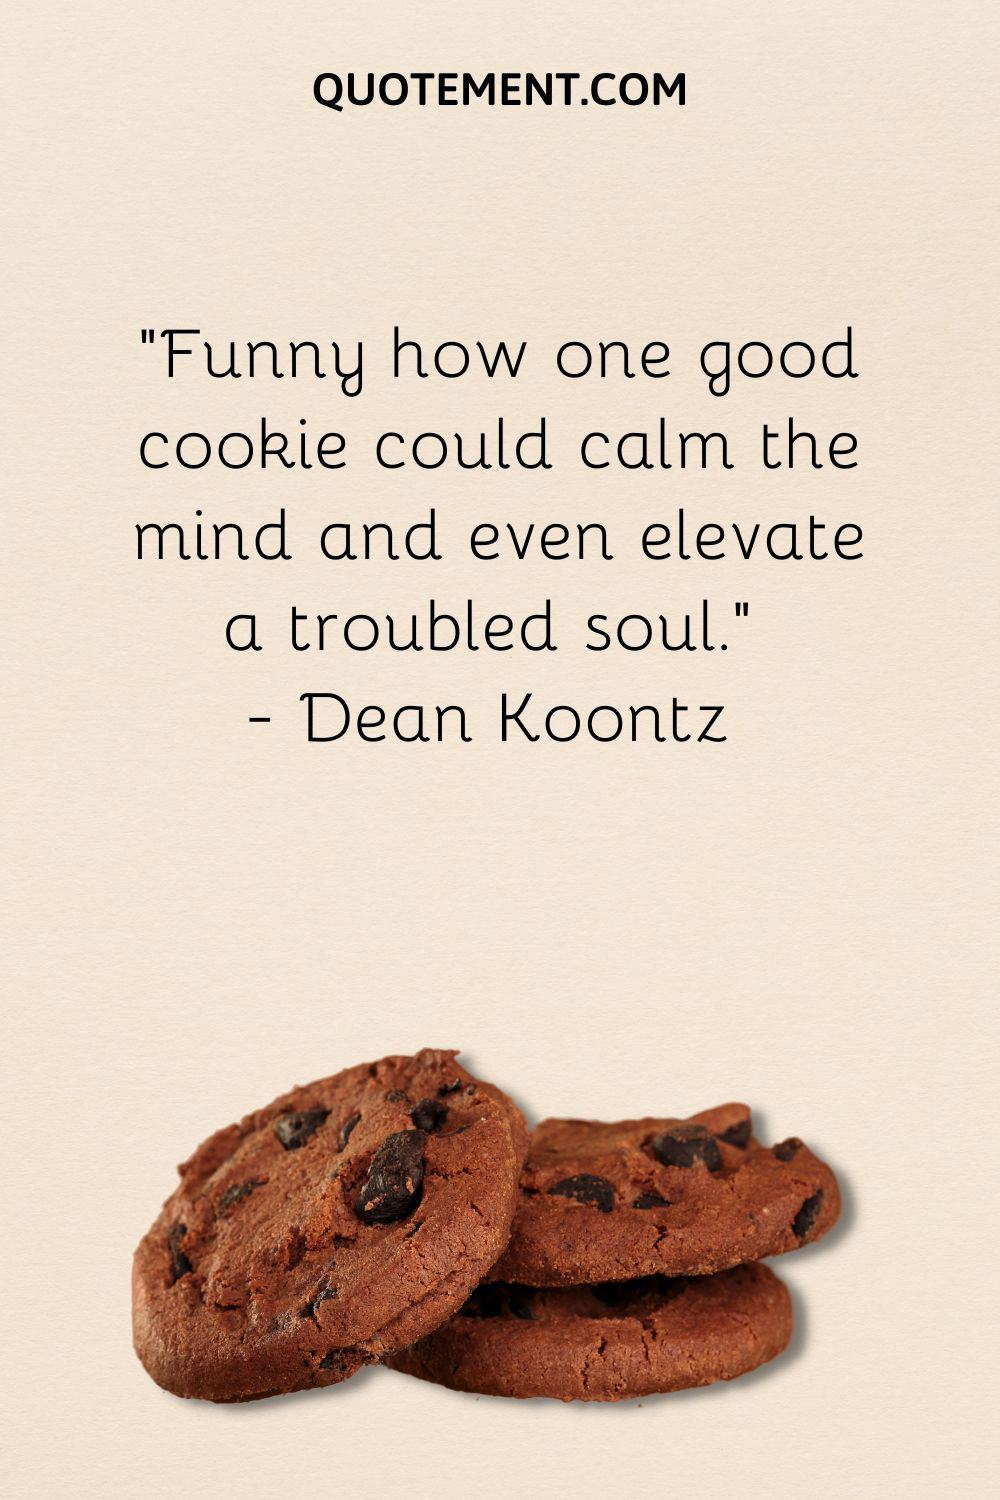 Funny how one good cookie could calm the mind and even elevate a troubled soul